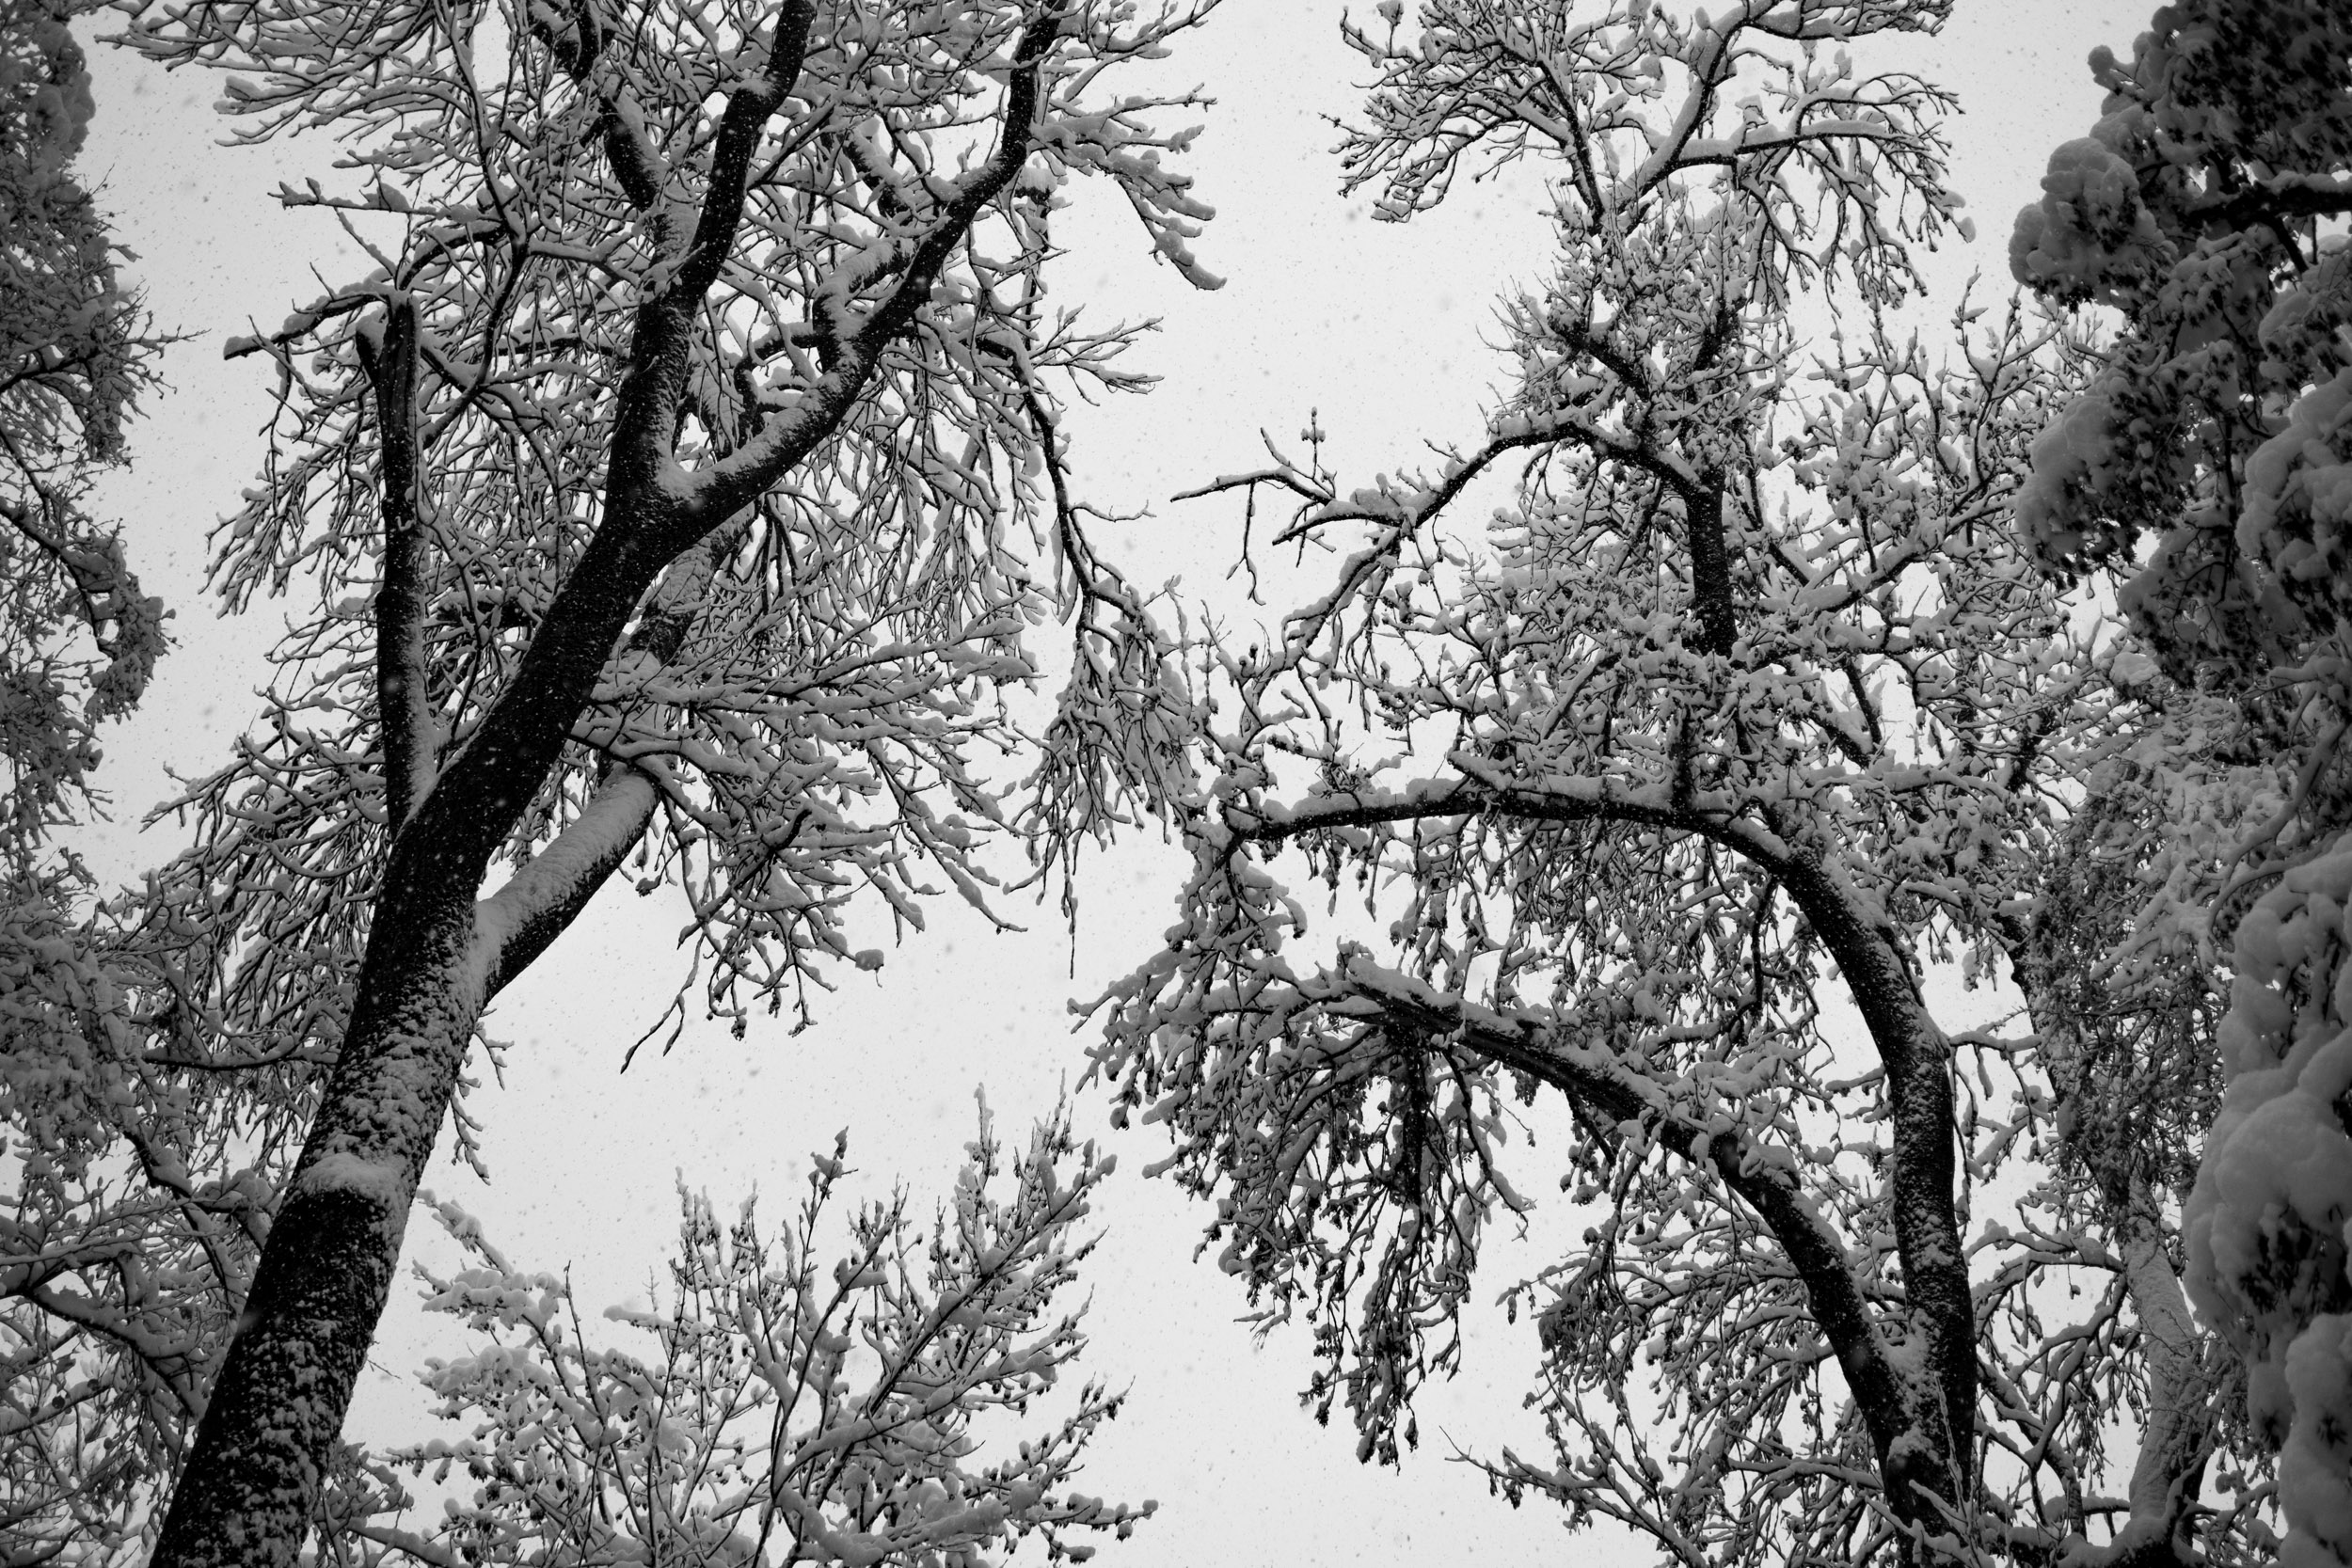 Some trees with snow on the leaves.